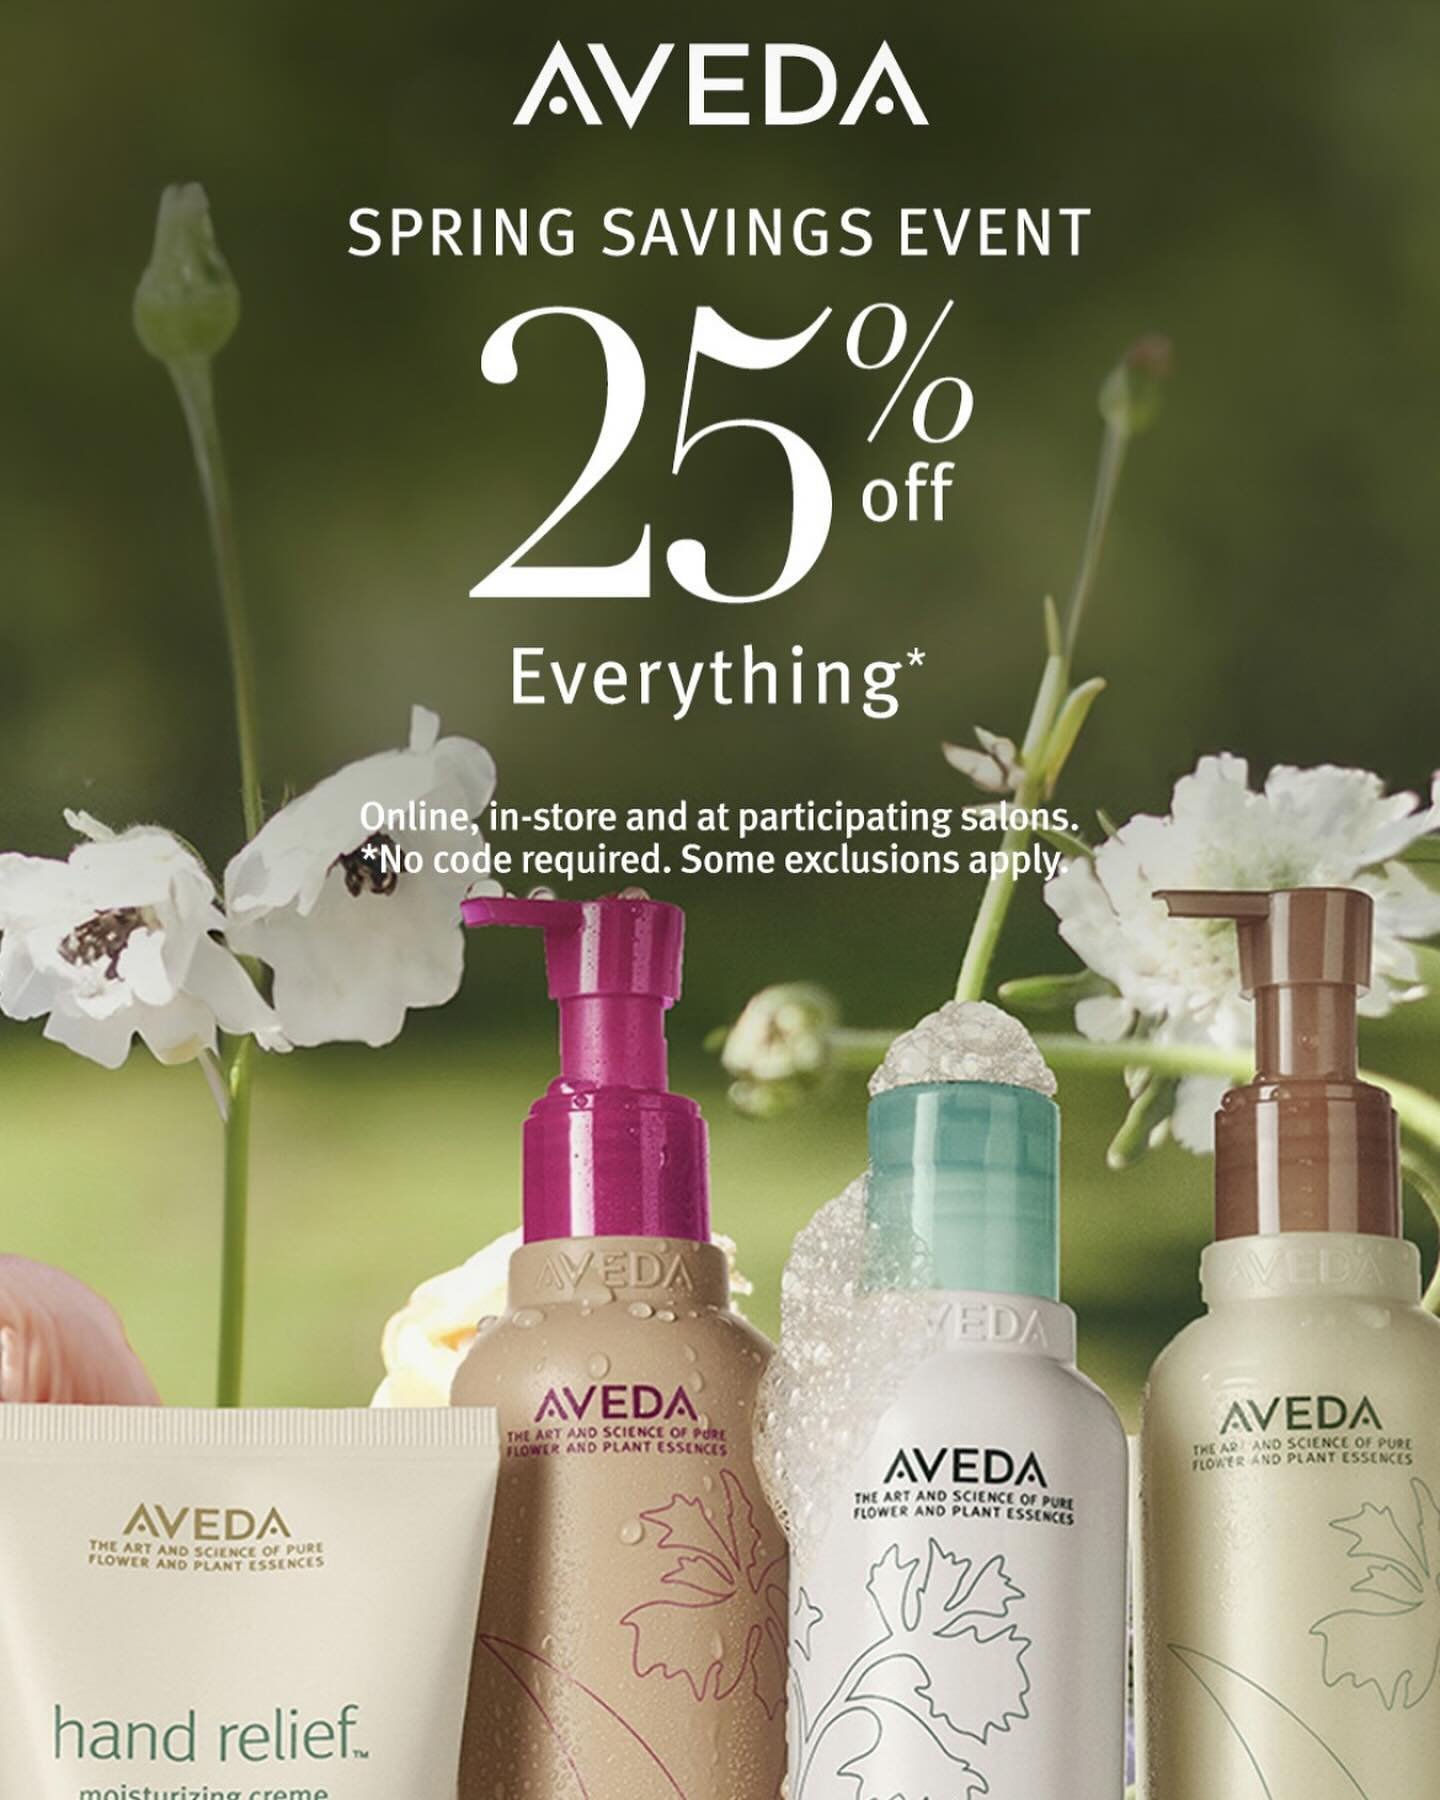 Save on your favorites until May 20th!